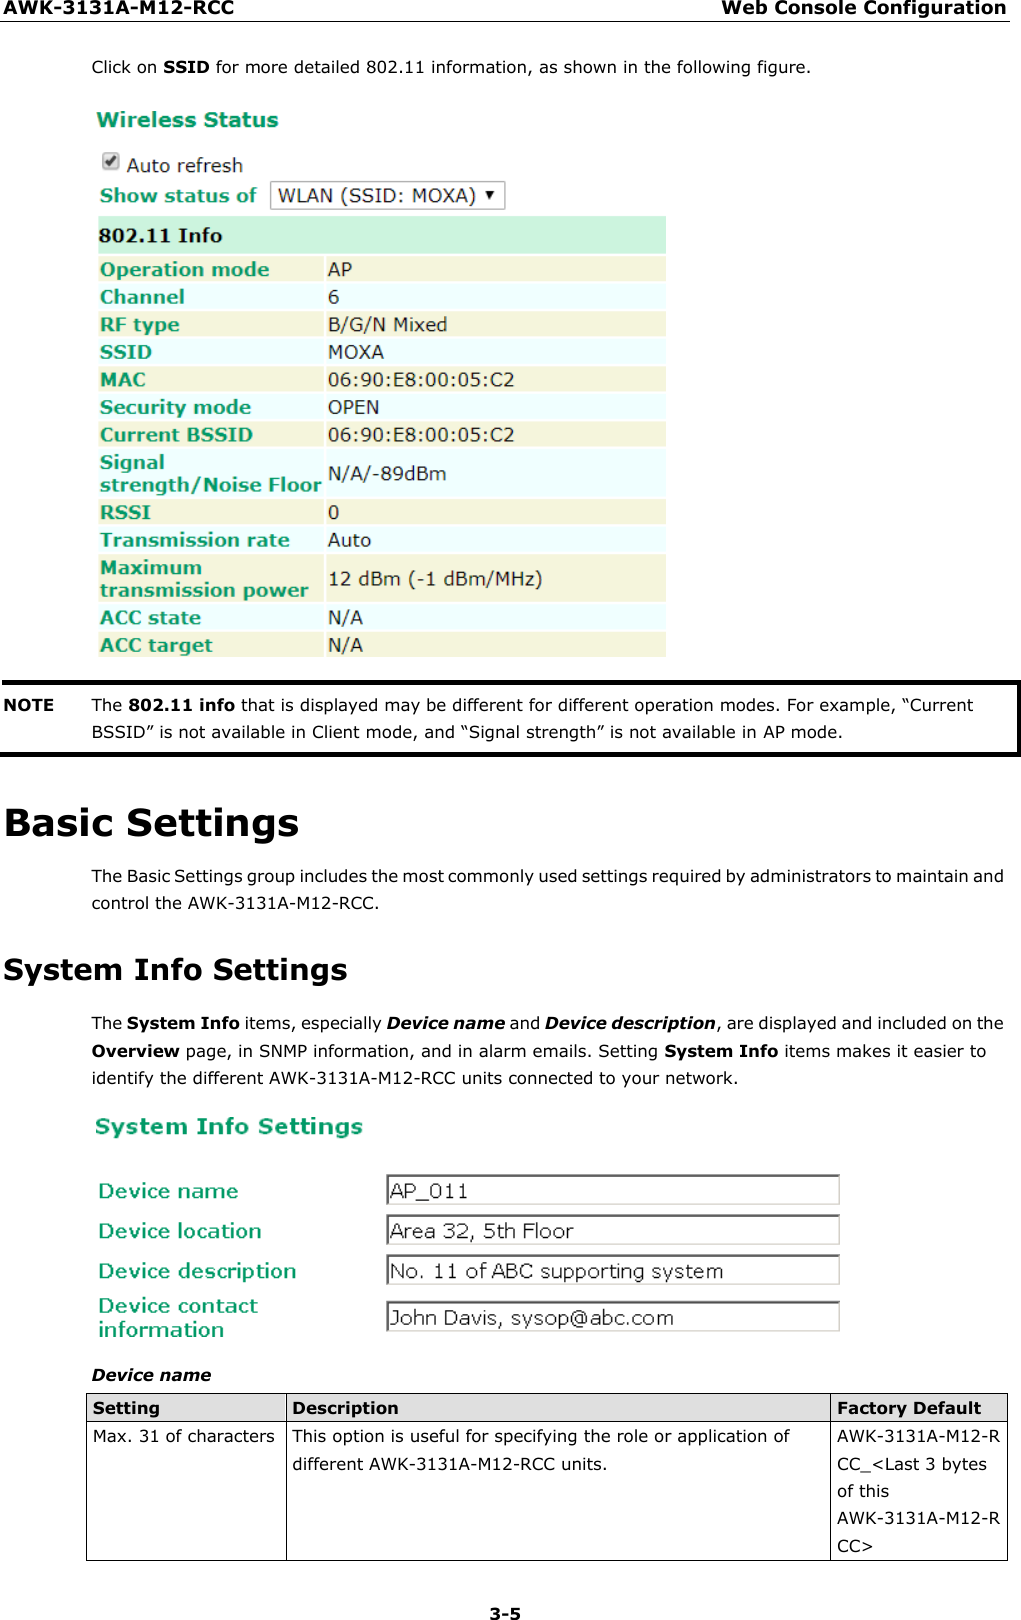 AWK-3131A-M12-RCC Web Console Configuration 3-5    Click on SSID for more detailed 802.11 information, as shown in the following figure.   NOTE The 802.11 info that is displayed may be different for different operation modes. For example, “Current BSSID” is not available in Client mode, and “Signal strength” is not available in AP mode.  Basic Settings The Basic Settings group includes the most commonly used settings required by administrators to maintain and control the AWK-3131A-M12-RCC.  System Info Settings The System Info items, especially Device name and Device description, are displayed and included on the Overview page, in SNMP information, and in alarm emails. Setting System Info items makes it easier to identify the different AWK-3131A-M12-RCC units connected to your network.   Device name  Setting Description Factory Default Max. 31 of characters This option is useful for specifying the role or application of different AWK-3131A-M12-RCC units. AWK-3131A-M12-R CC_&lt;Last 3 bytes of this AWK-3131A-M12-R CC&gt; 